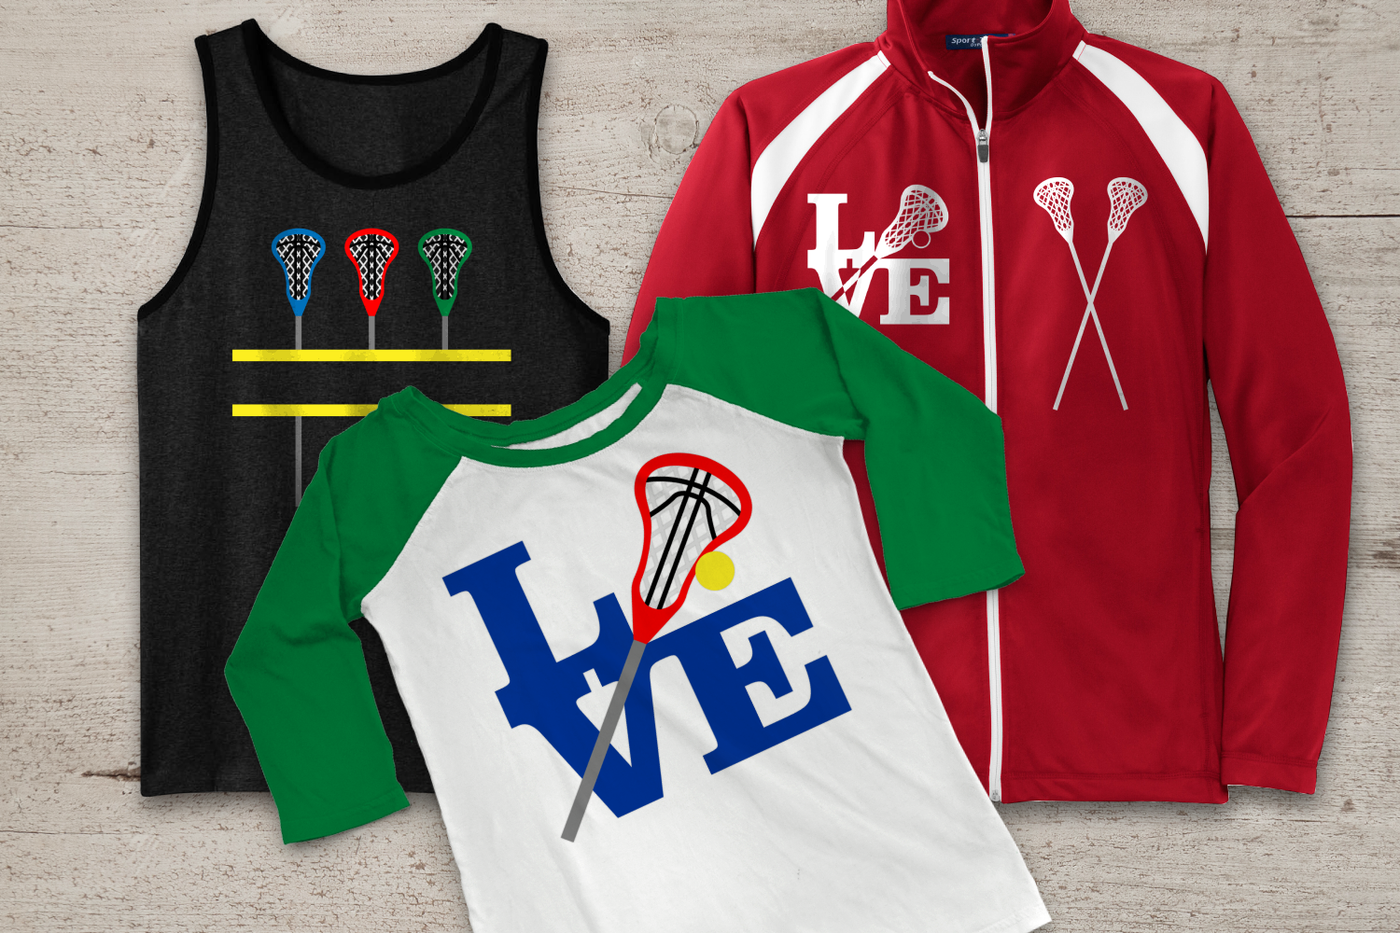 Tank top, track jacket, and raglan tee. The tank has 3 lacrosse sticks with a split, the shirt says "LOVE" with a lacrosse stick for the O, the jacket also has the "Love" design, and has crossed lacrosse sticks as well.